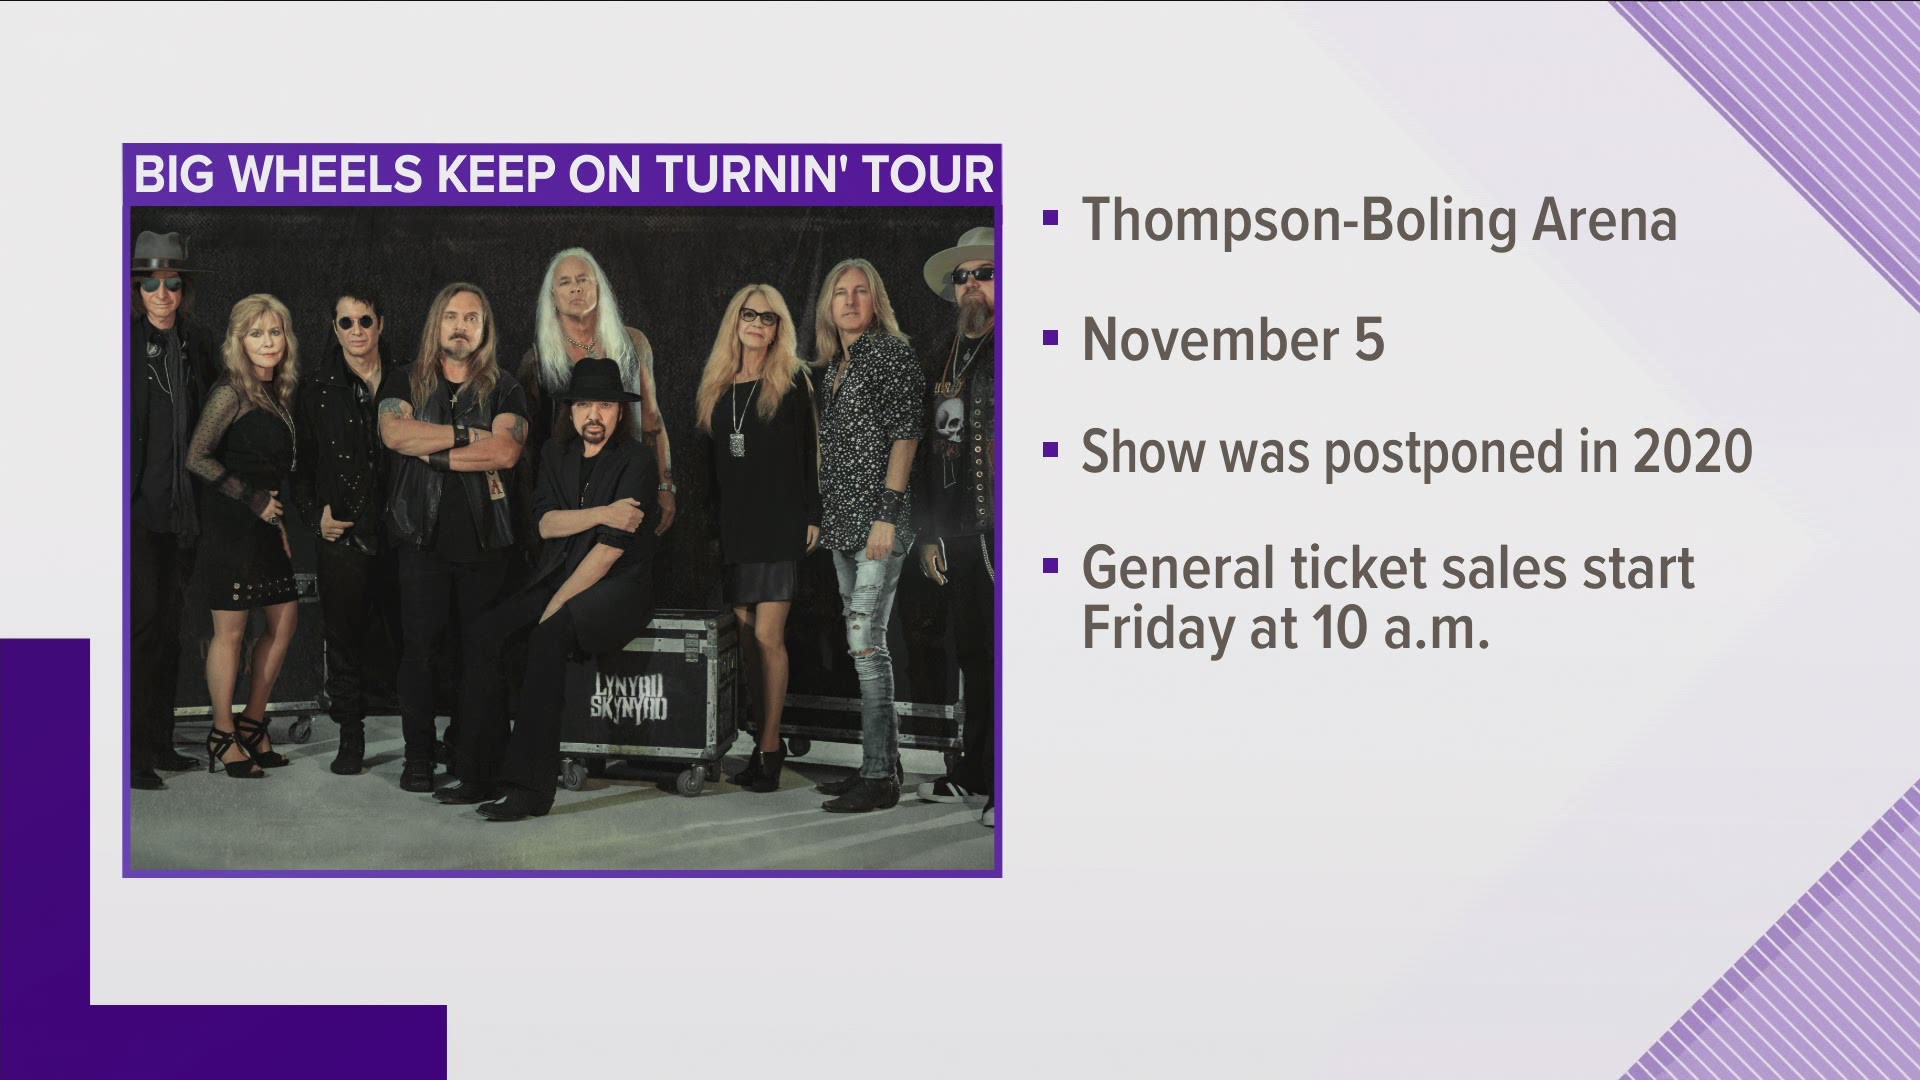 The tour is coming to Knoxville after being postponed due to the pandemic. Tickets go on sale Friday at 10 a.m.